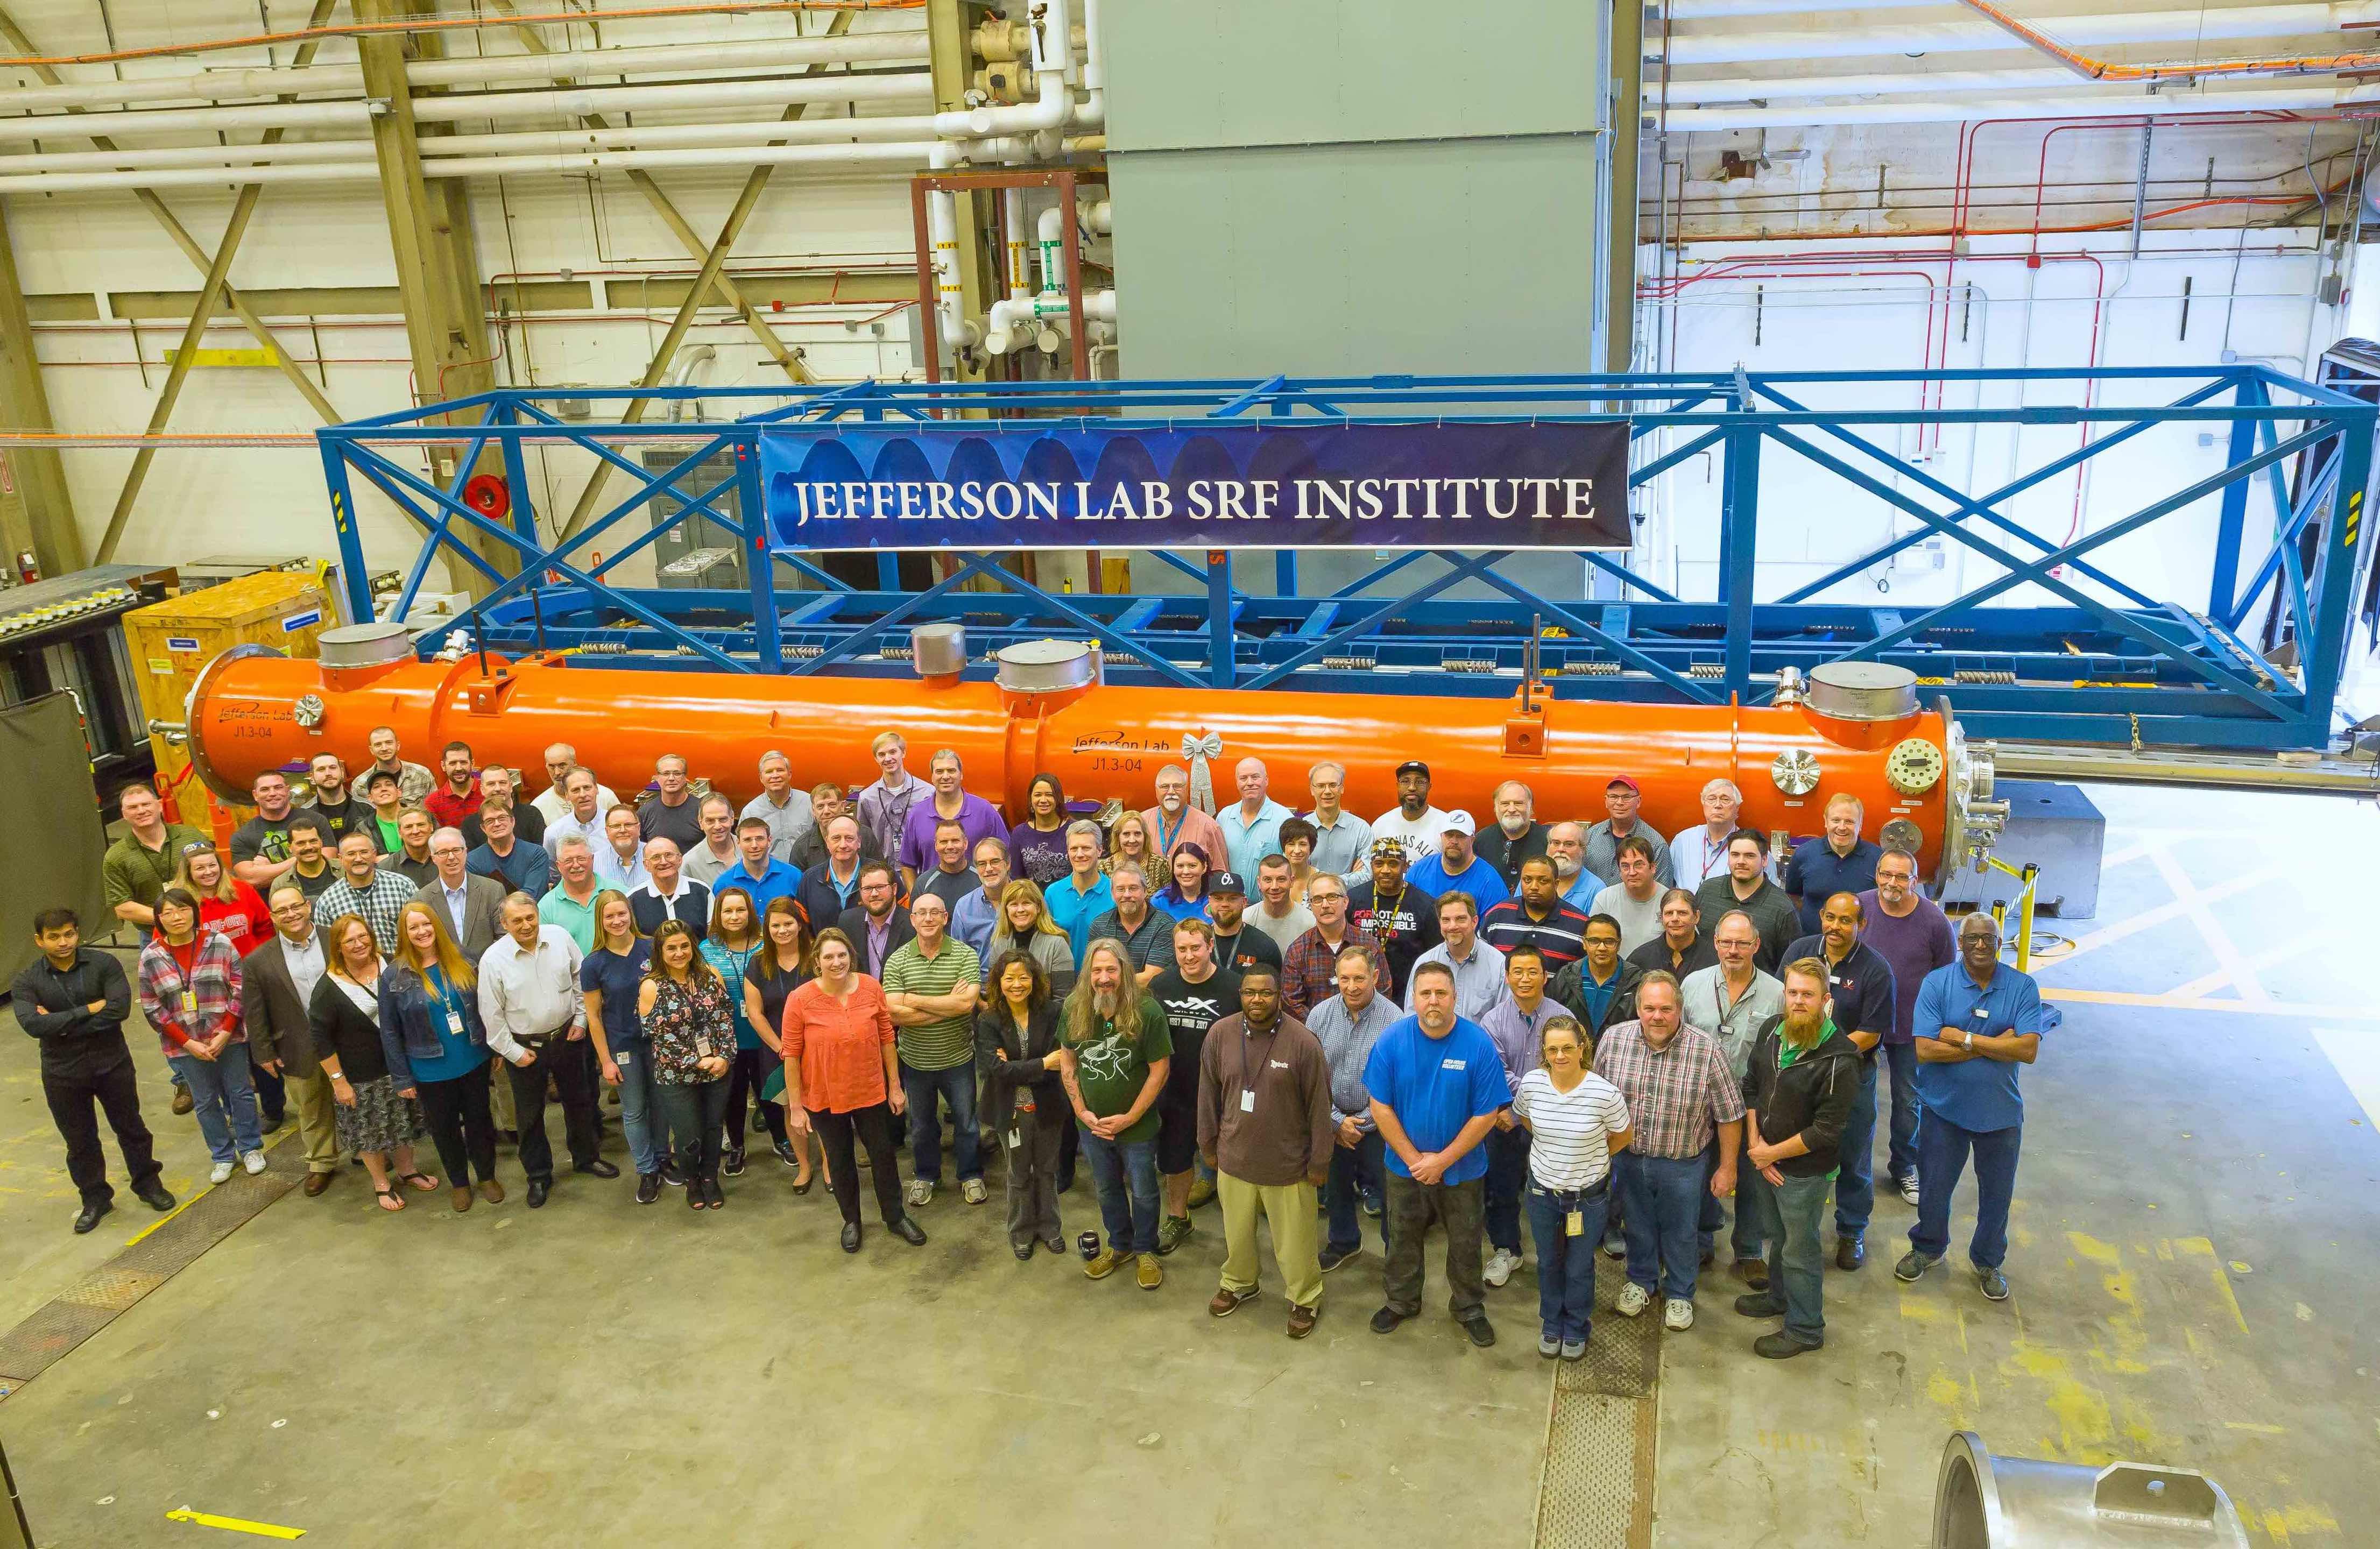 LCLS-II Project Team with Cryomodule